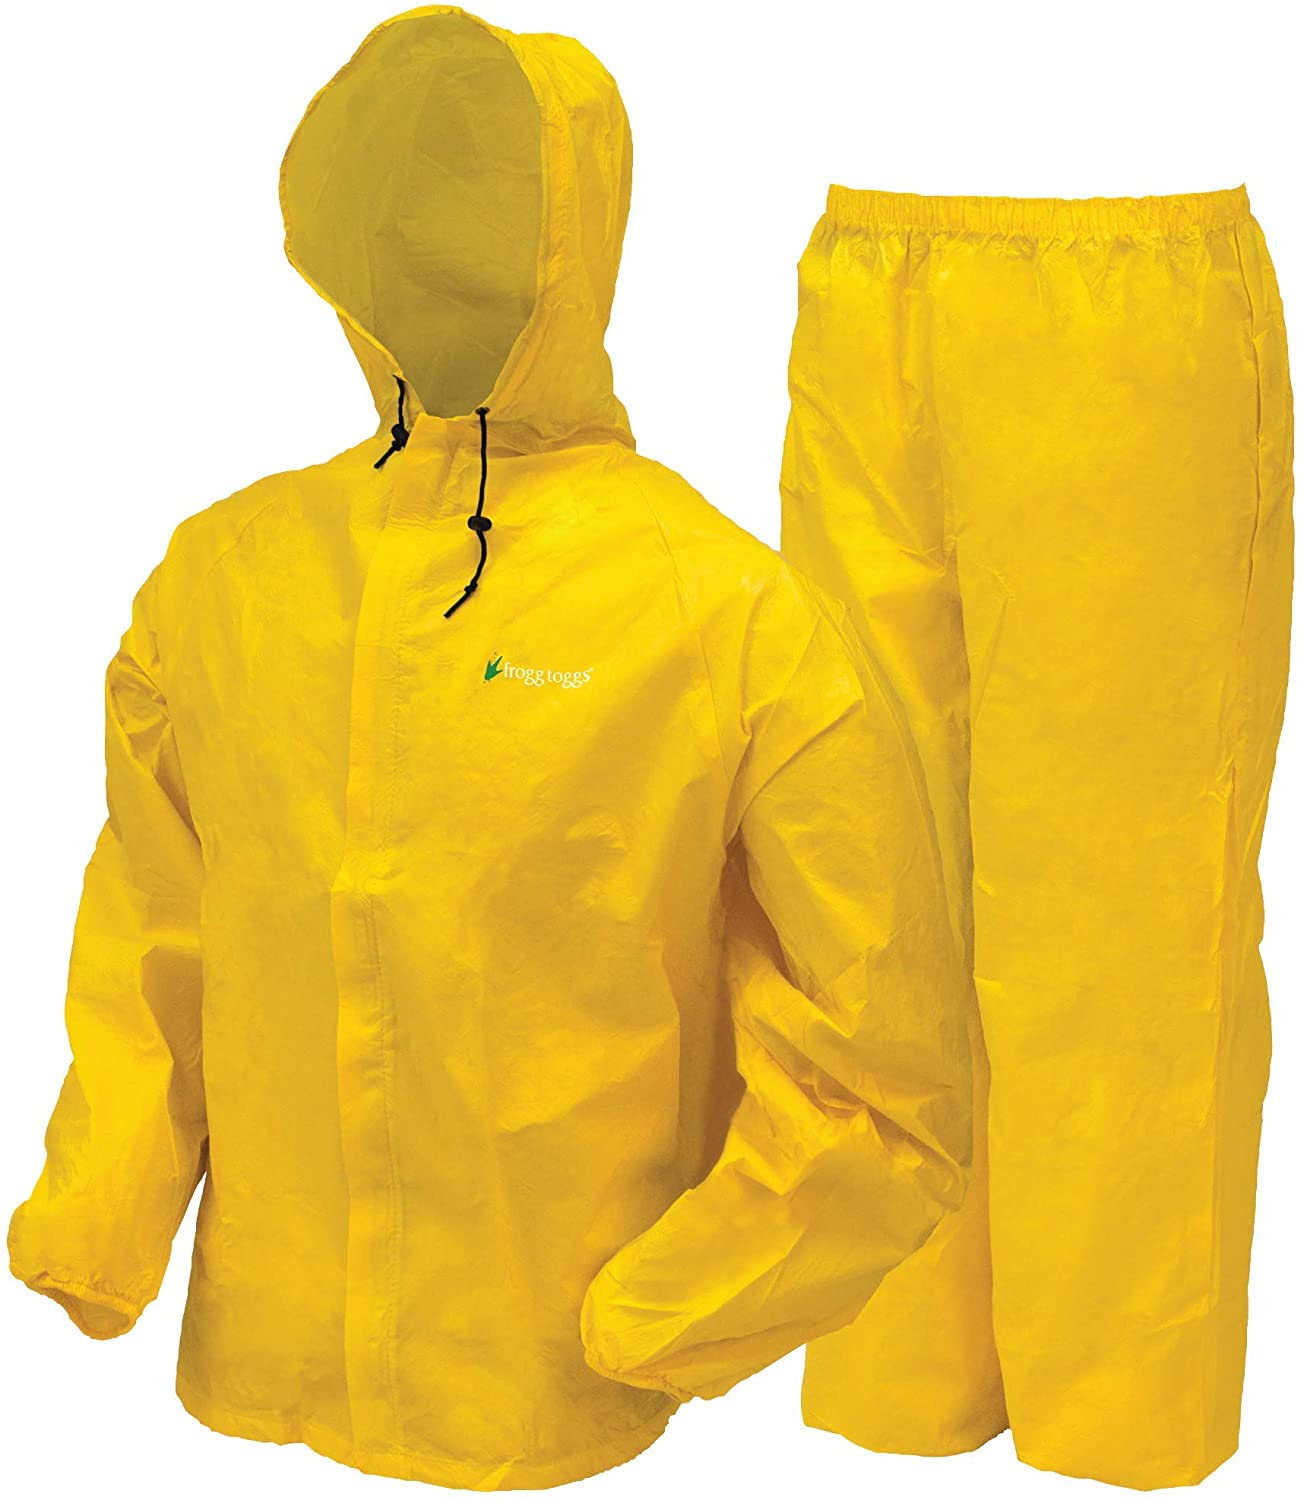 FROGG TOGGS Ultra-Lite2 Waterproof Breathable Protective Rain Suit